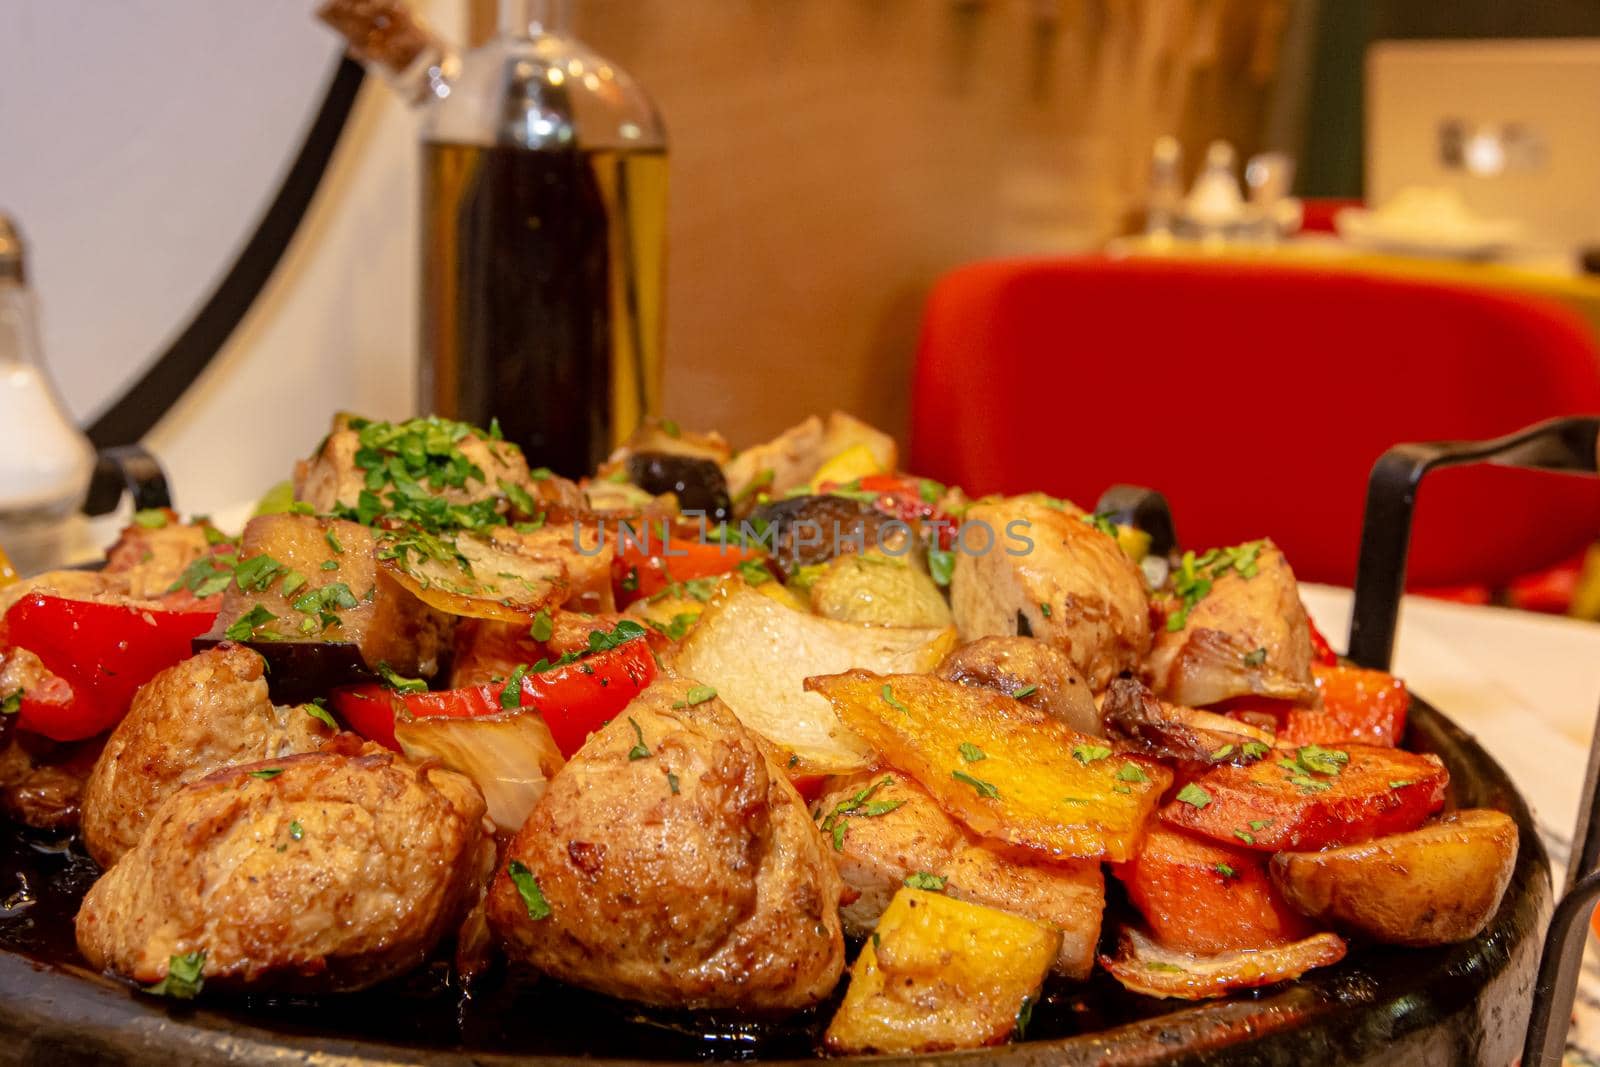 Pan-fried potatoes, meat and vegetables for a large company.